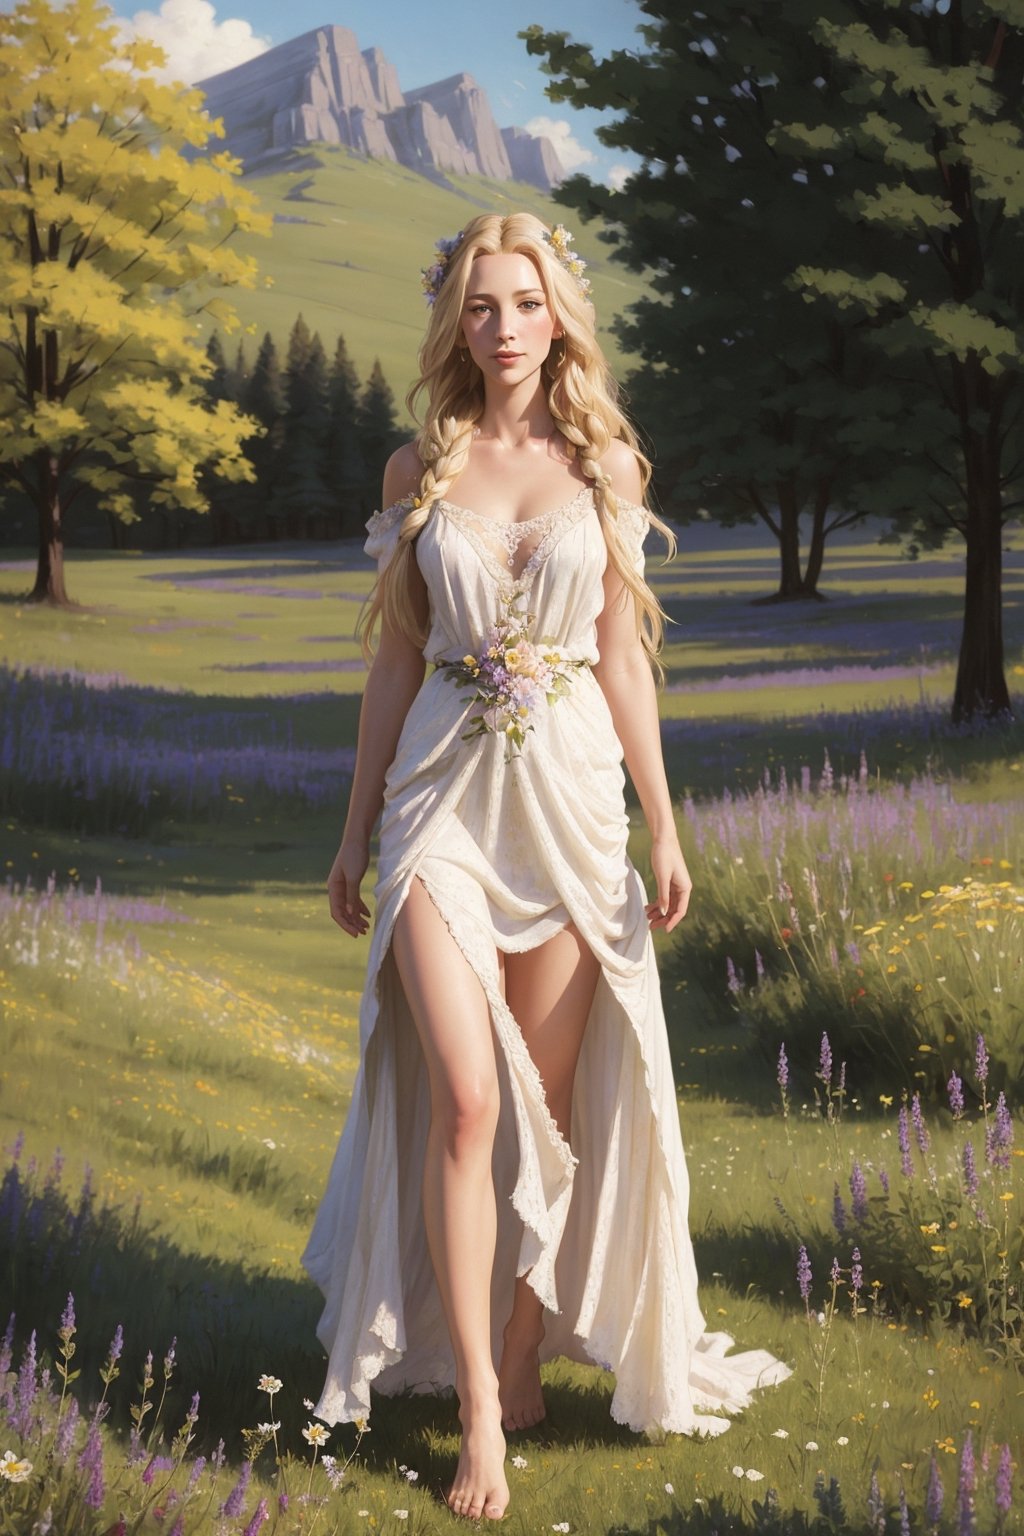 Portrait of a 25-year-old girl with long blonde hair, dressed in a dress made of light material, barefoot, standing in a meadow among flowers,  contrapposto,
 brom's art, depiction of an epic fantasy character, portrait of a character, fantasy art, works by Richard Schmid, A.Mukha, Volegov, impressionism